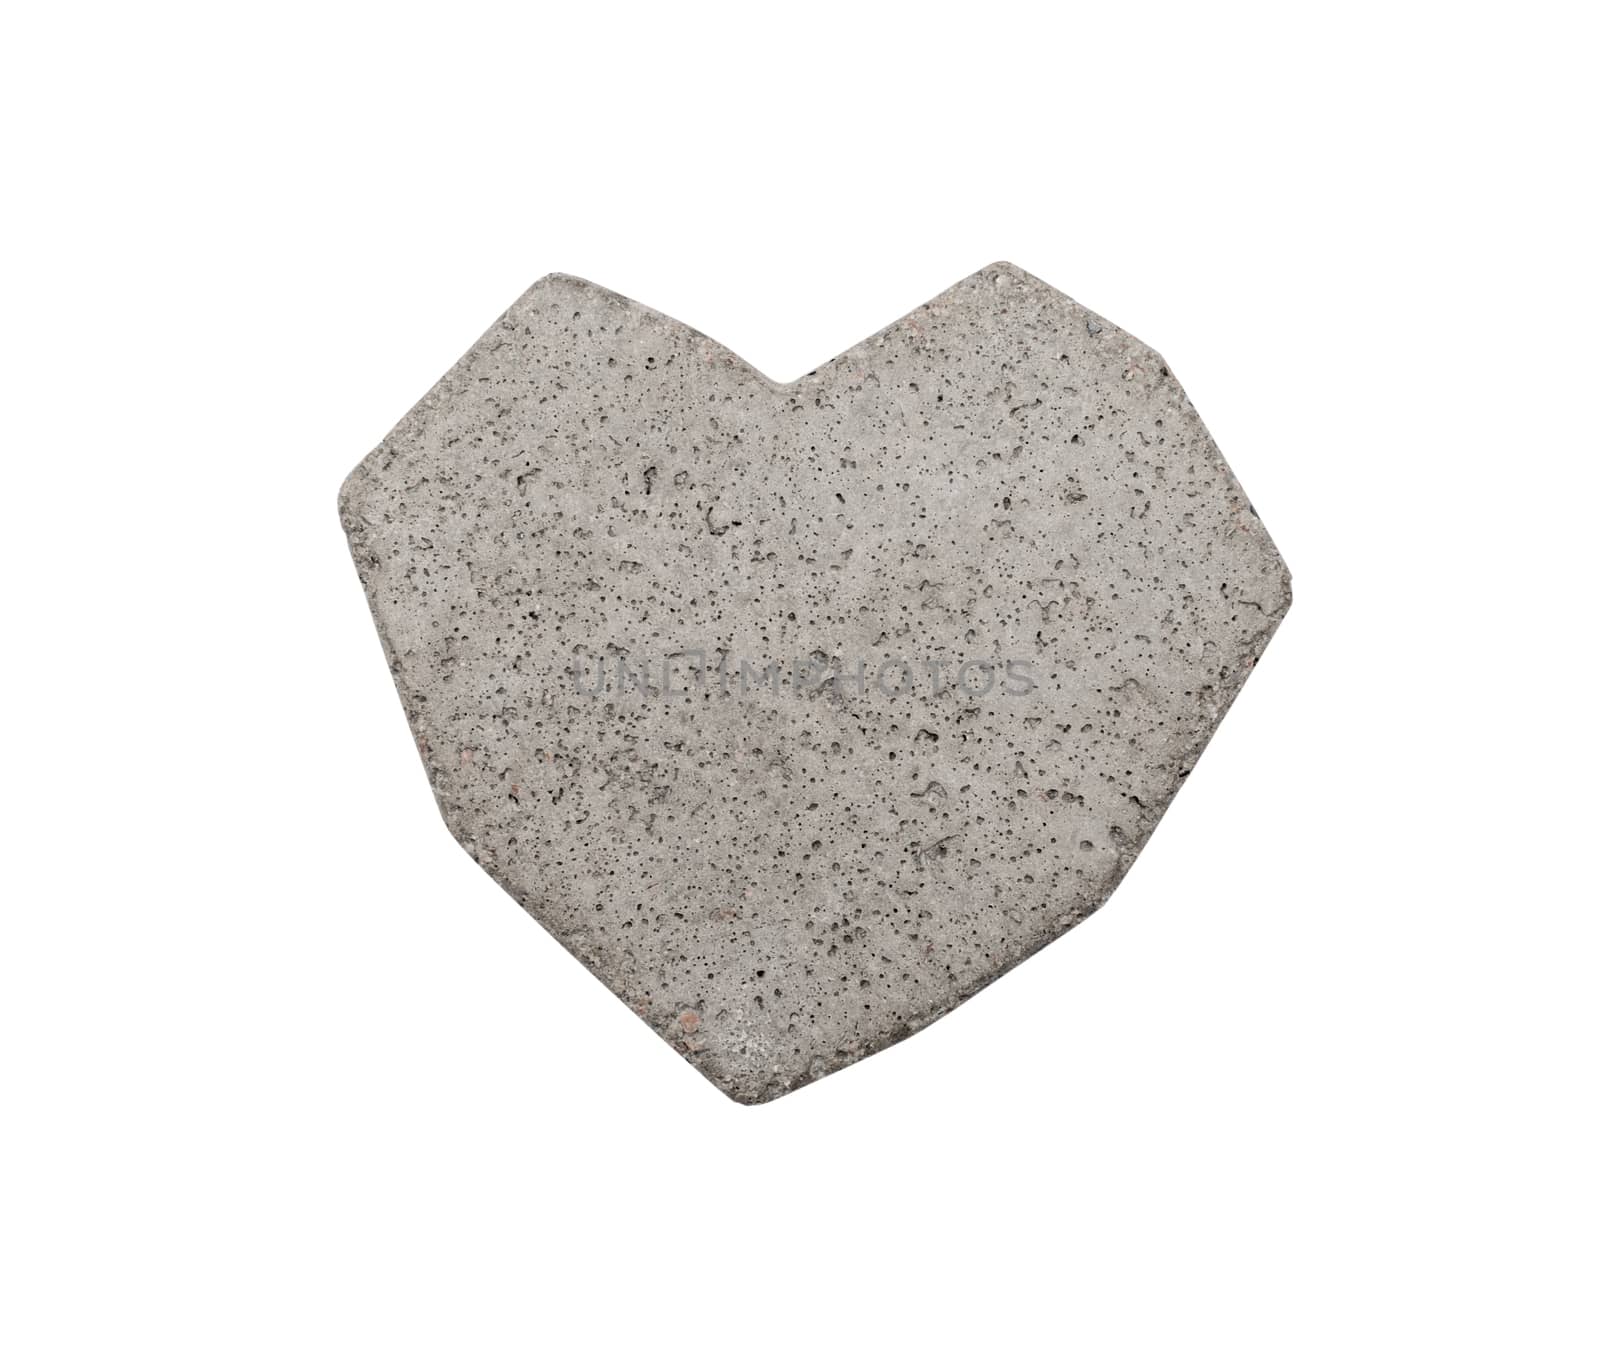 Heart of concrete on a white background by DNKSTUDIO